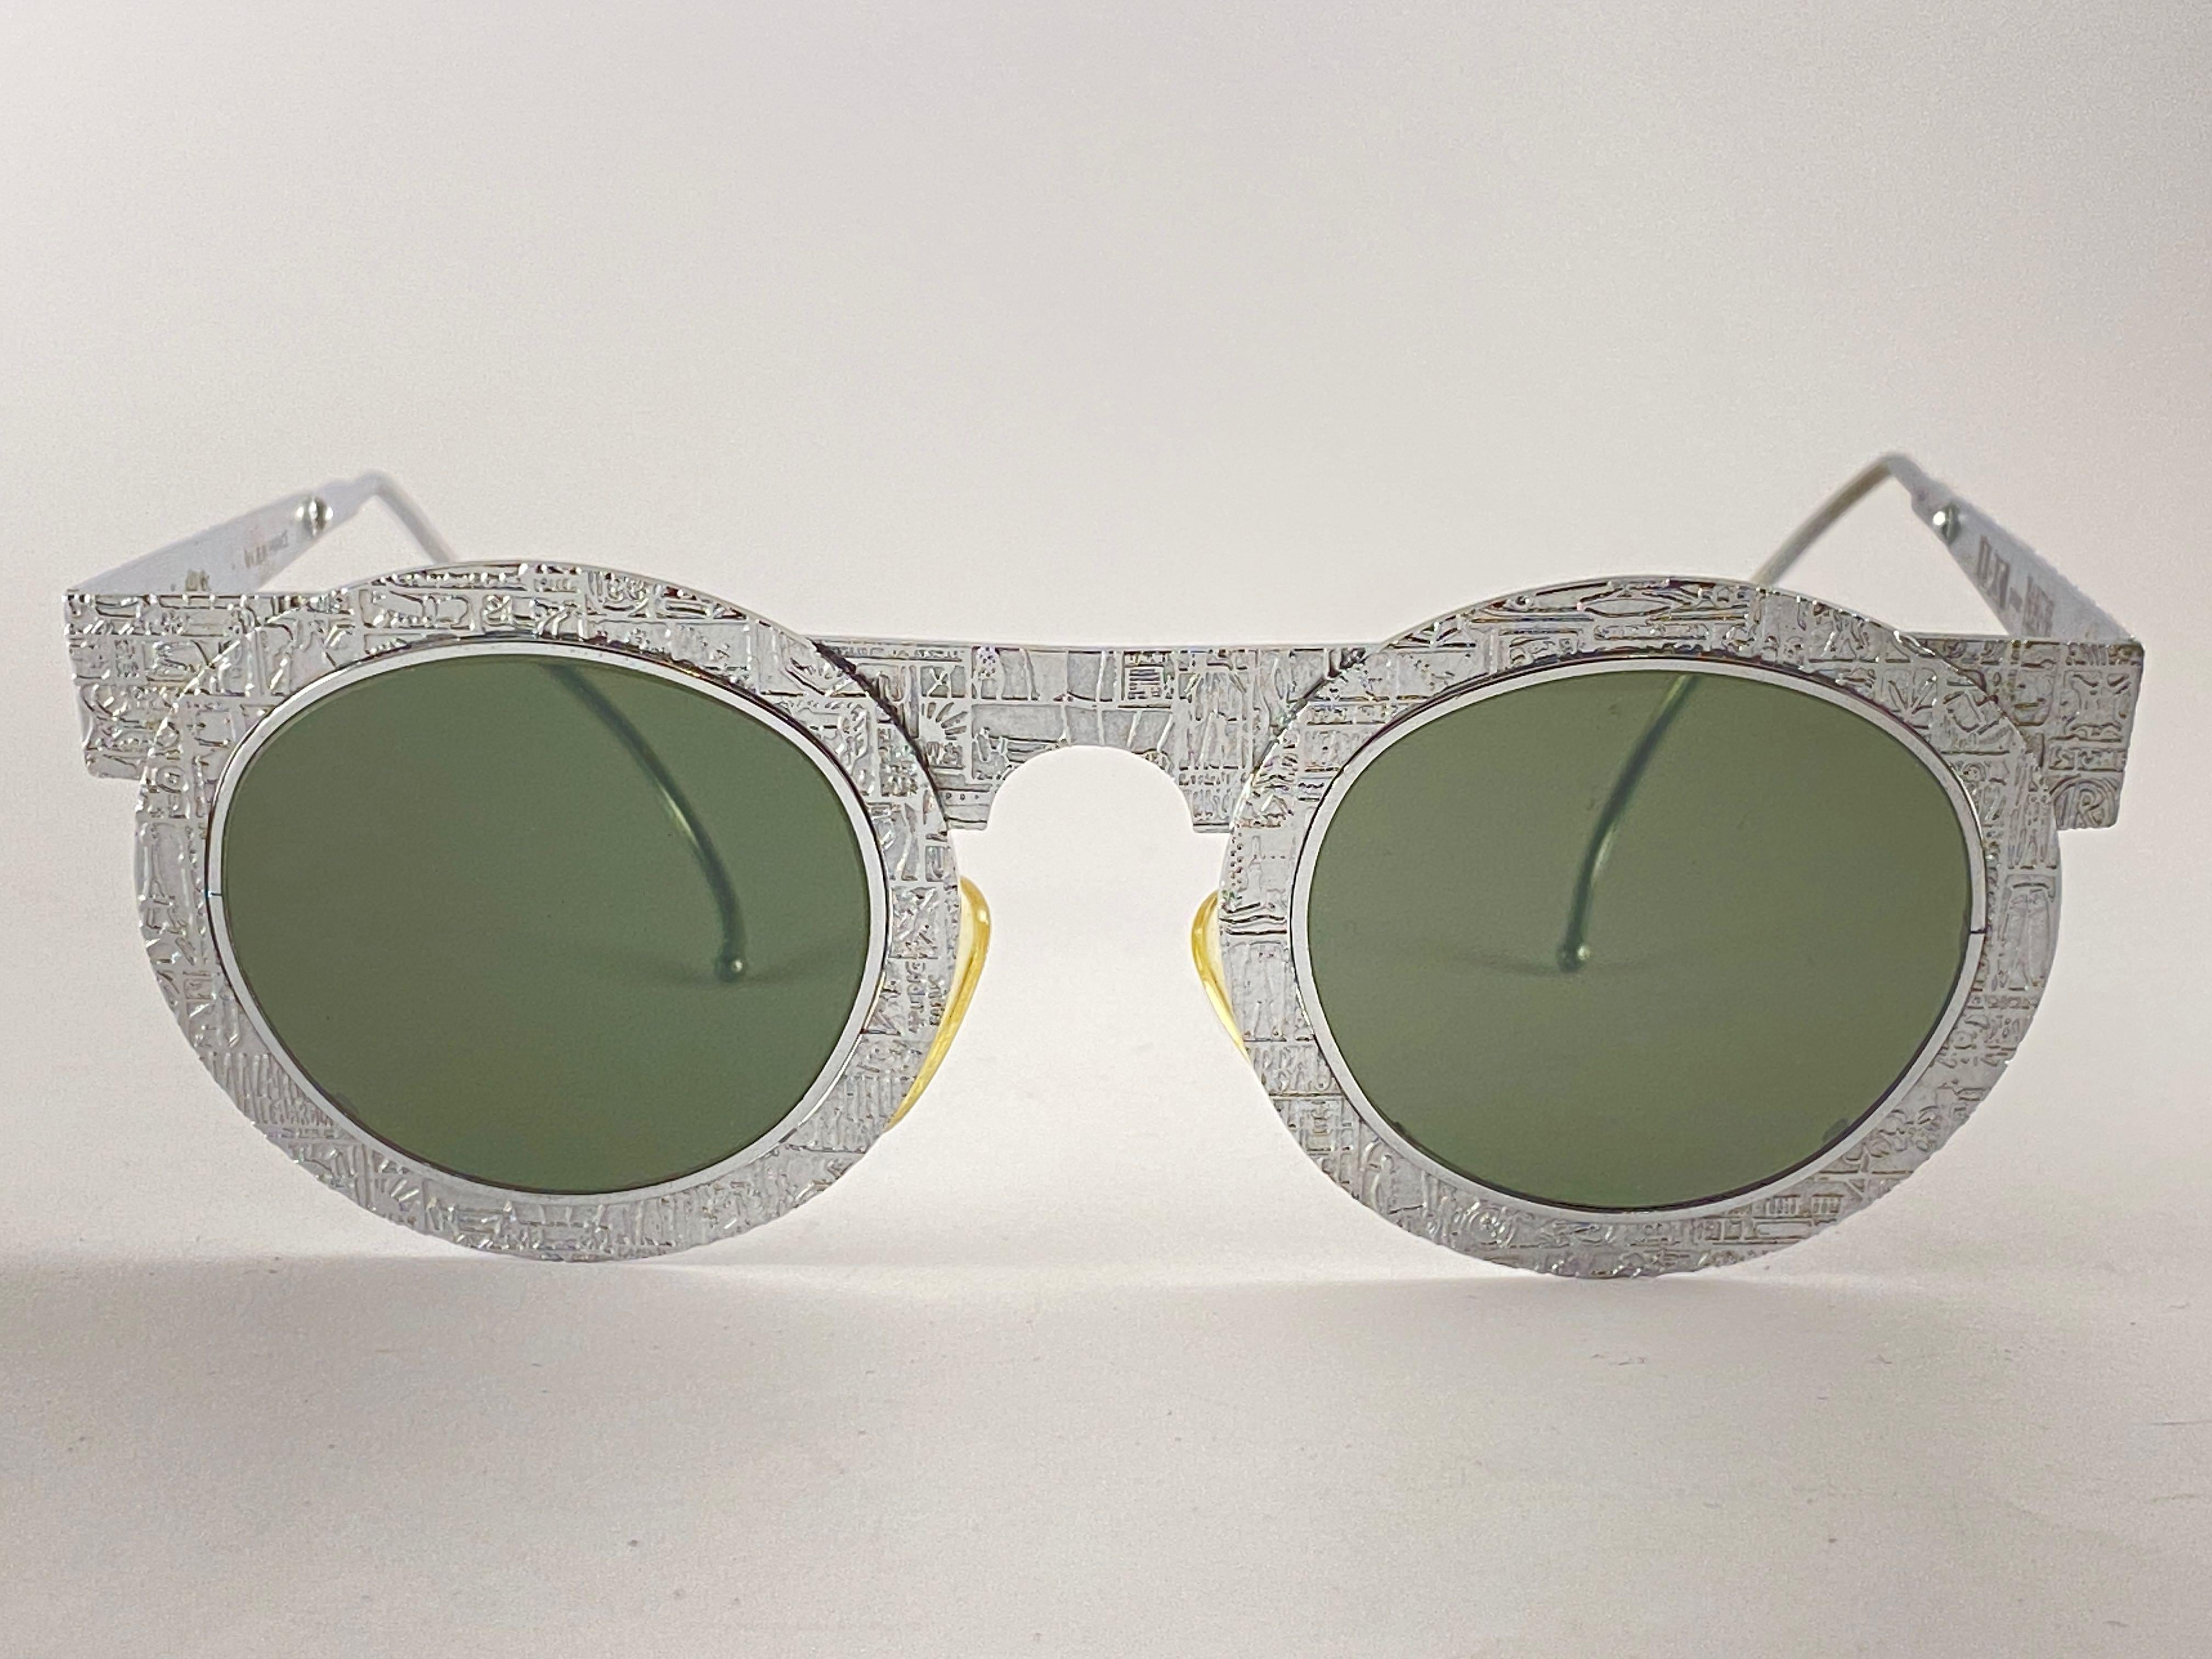 

IDC Pour Marithe Francois Girbaud round silver with engraved accents sunglasses holding a spotless pair of dark grey lenses. Curled temples for a fashionable yet comfortable wear.

New, never worn or displayed. This pair could show minor sign of